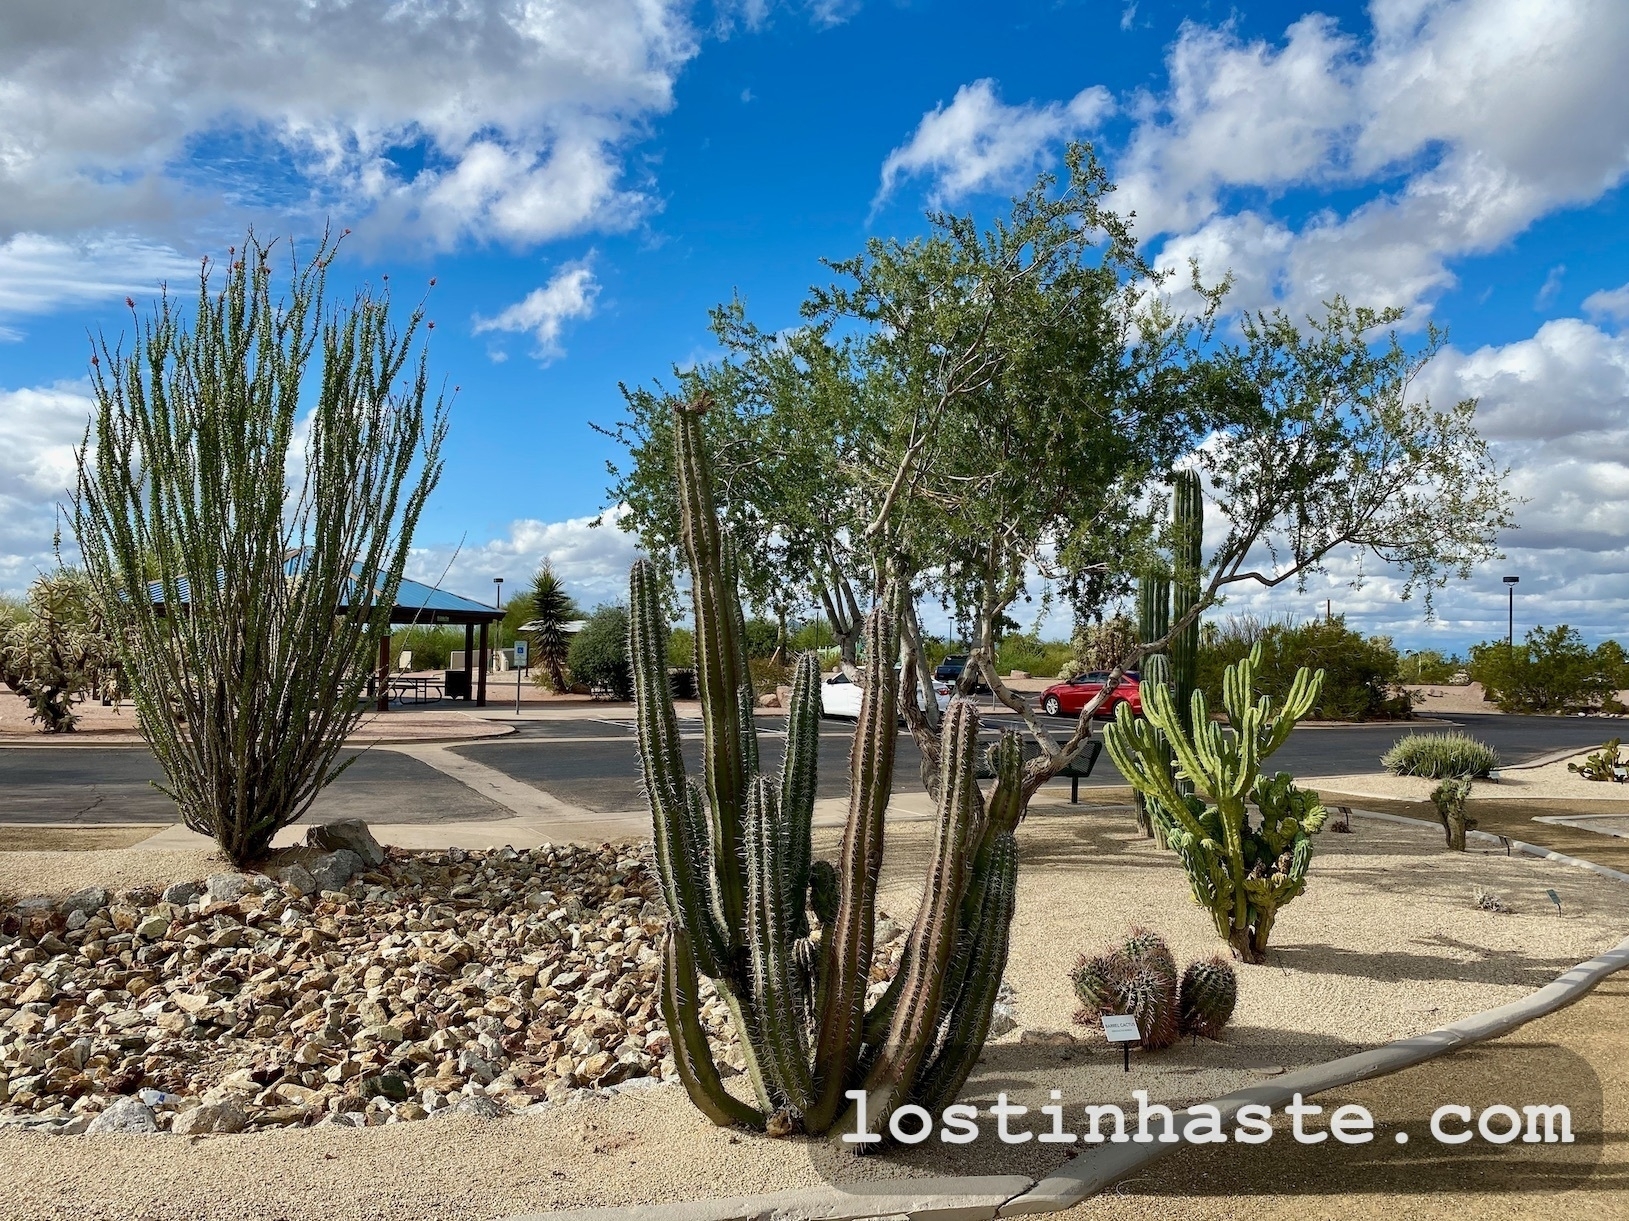 Various cacti and desert shrubs occupy a landscaped area, under a partly cloudy sky. The text 'lostinahaste.com' overlays the bottom right.